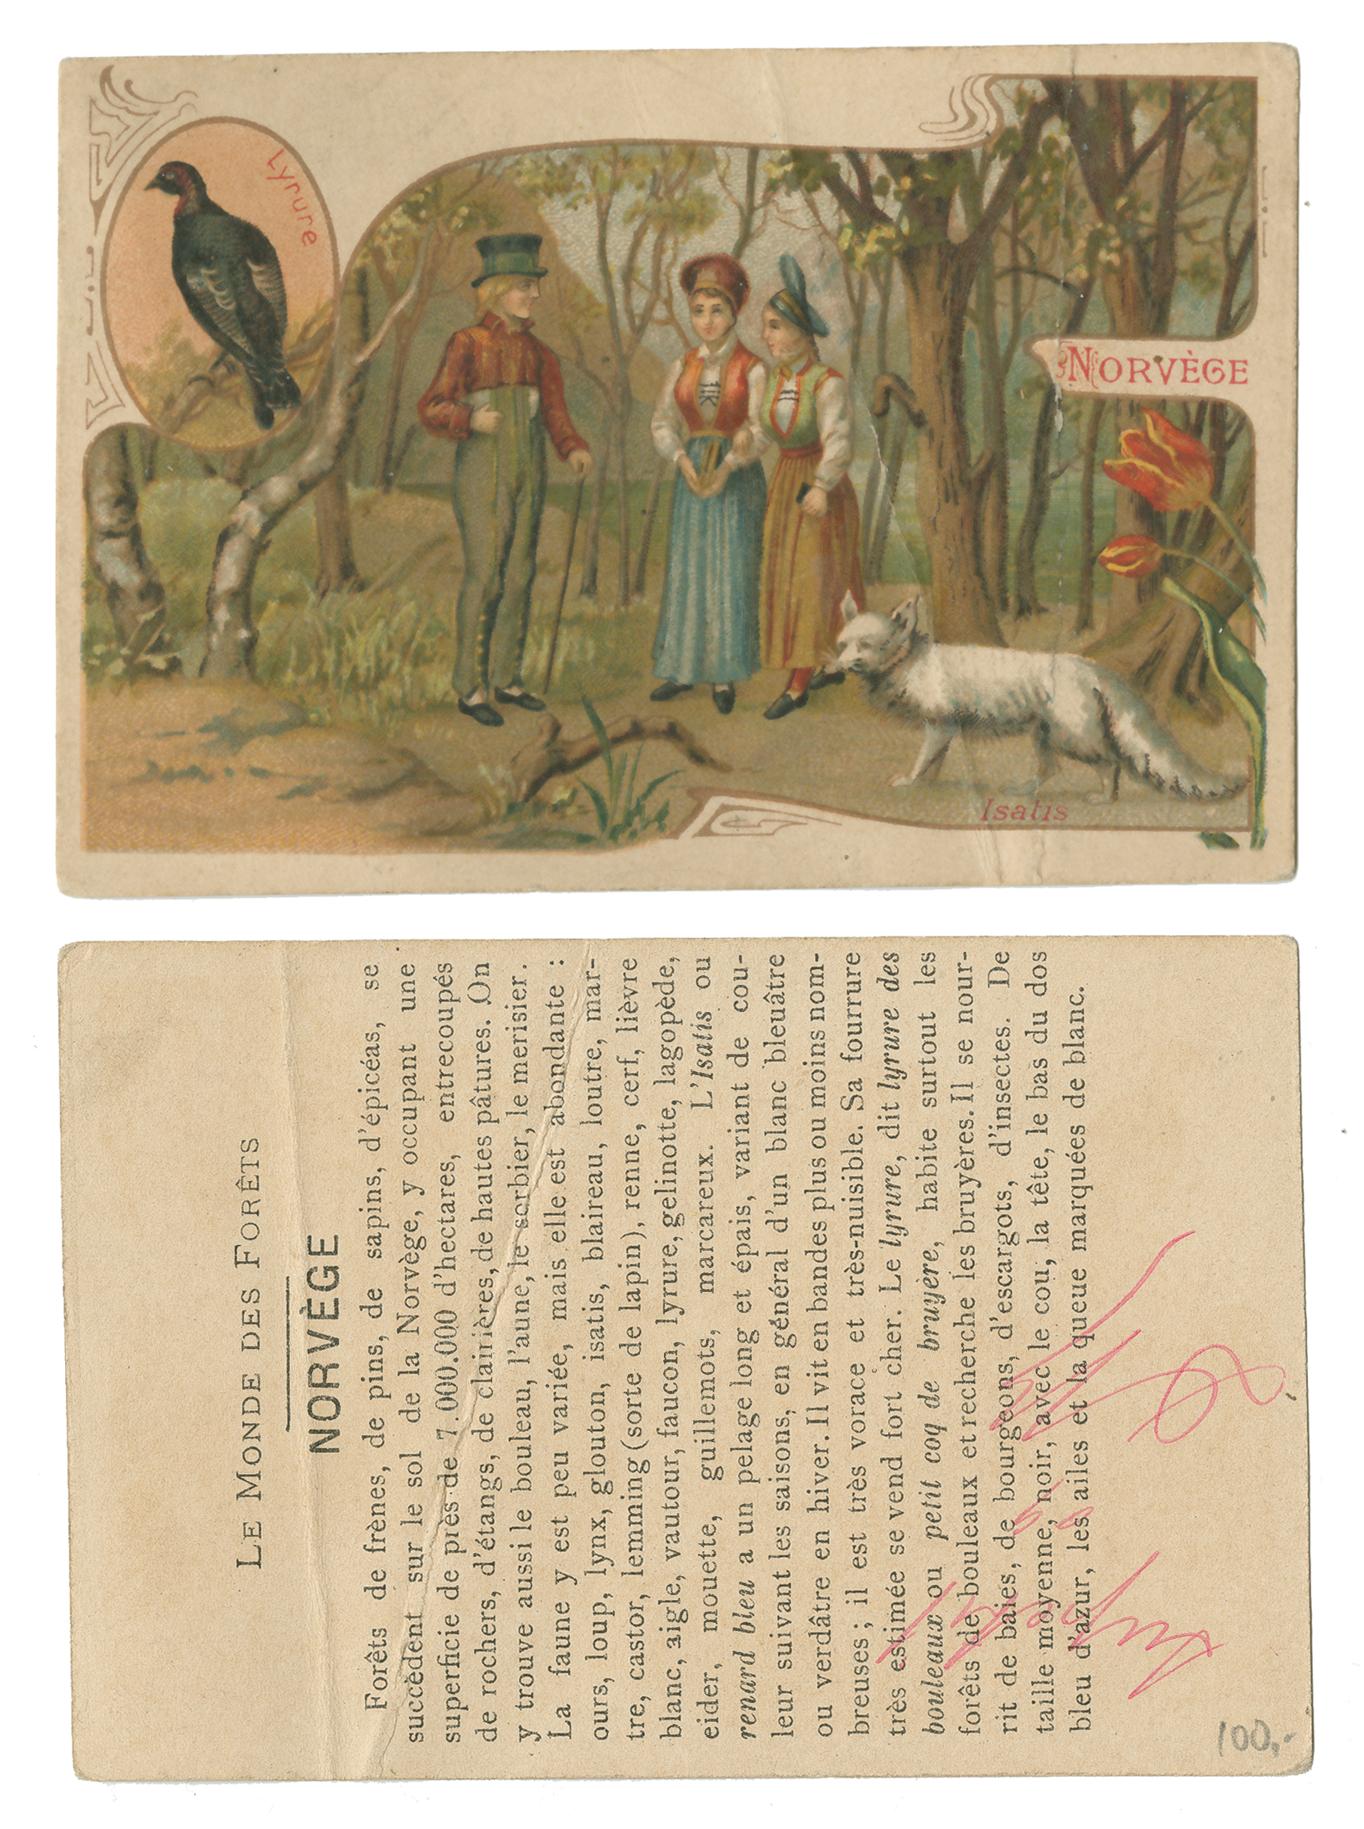 two pages showing an illustration of people and a dog in the woods